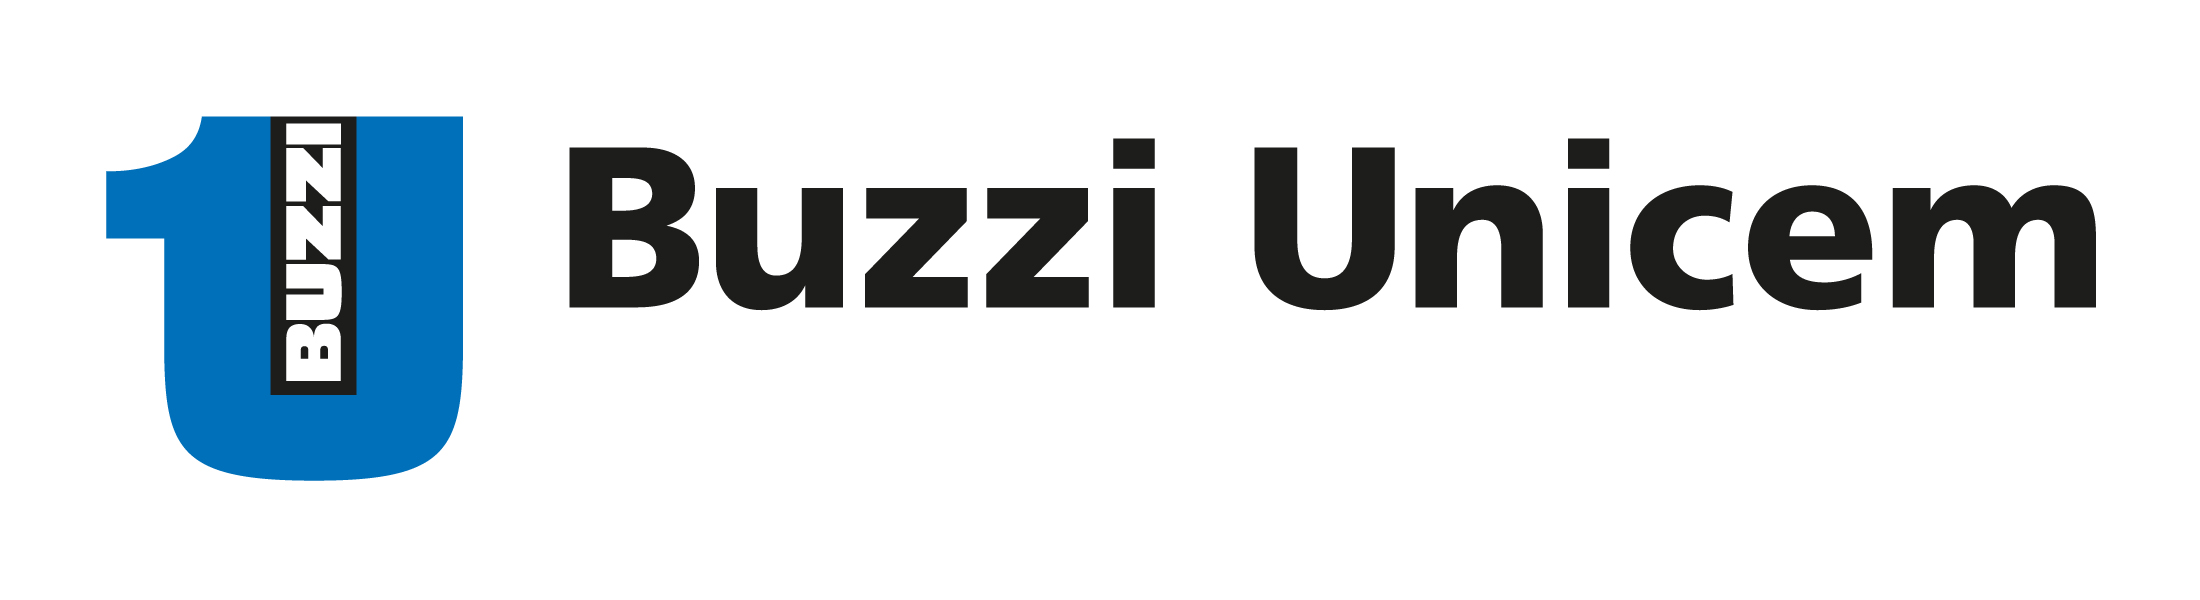 Buzzi Unicem Rejects Recent Allegations Against Its Reputation